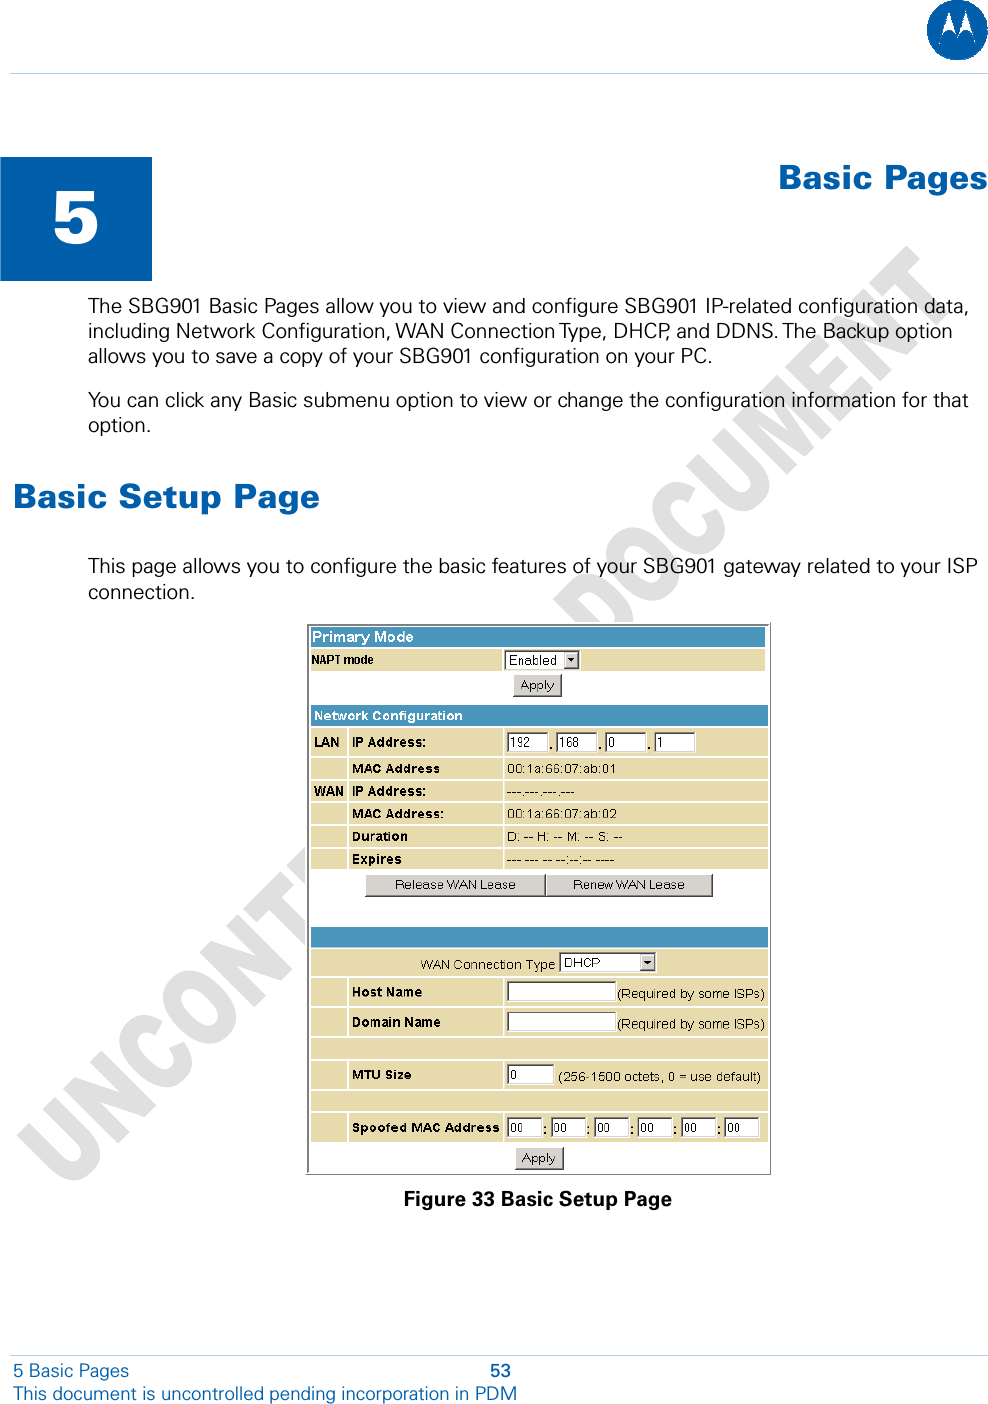   5  Basic PagesThe SBG901 Basic Pages allow you to view and configure SBG901 IP-related configuration data, including Network Configuration, WAN Connection Type, DHCP, and DDNS. The Backup option allows you to save a copy of your SBG901 configuration on your PC. You can click any Basic submenu option to view or change the configuration information for that option. Basic Setup Page This page allows you to configure the basic features of your SBG901 gateway related to your ISP connection.  Figure 33 Basic Setup Page 5 Basic Pages  53 This document is uncontrolled pending incorporation in PDM  